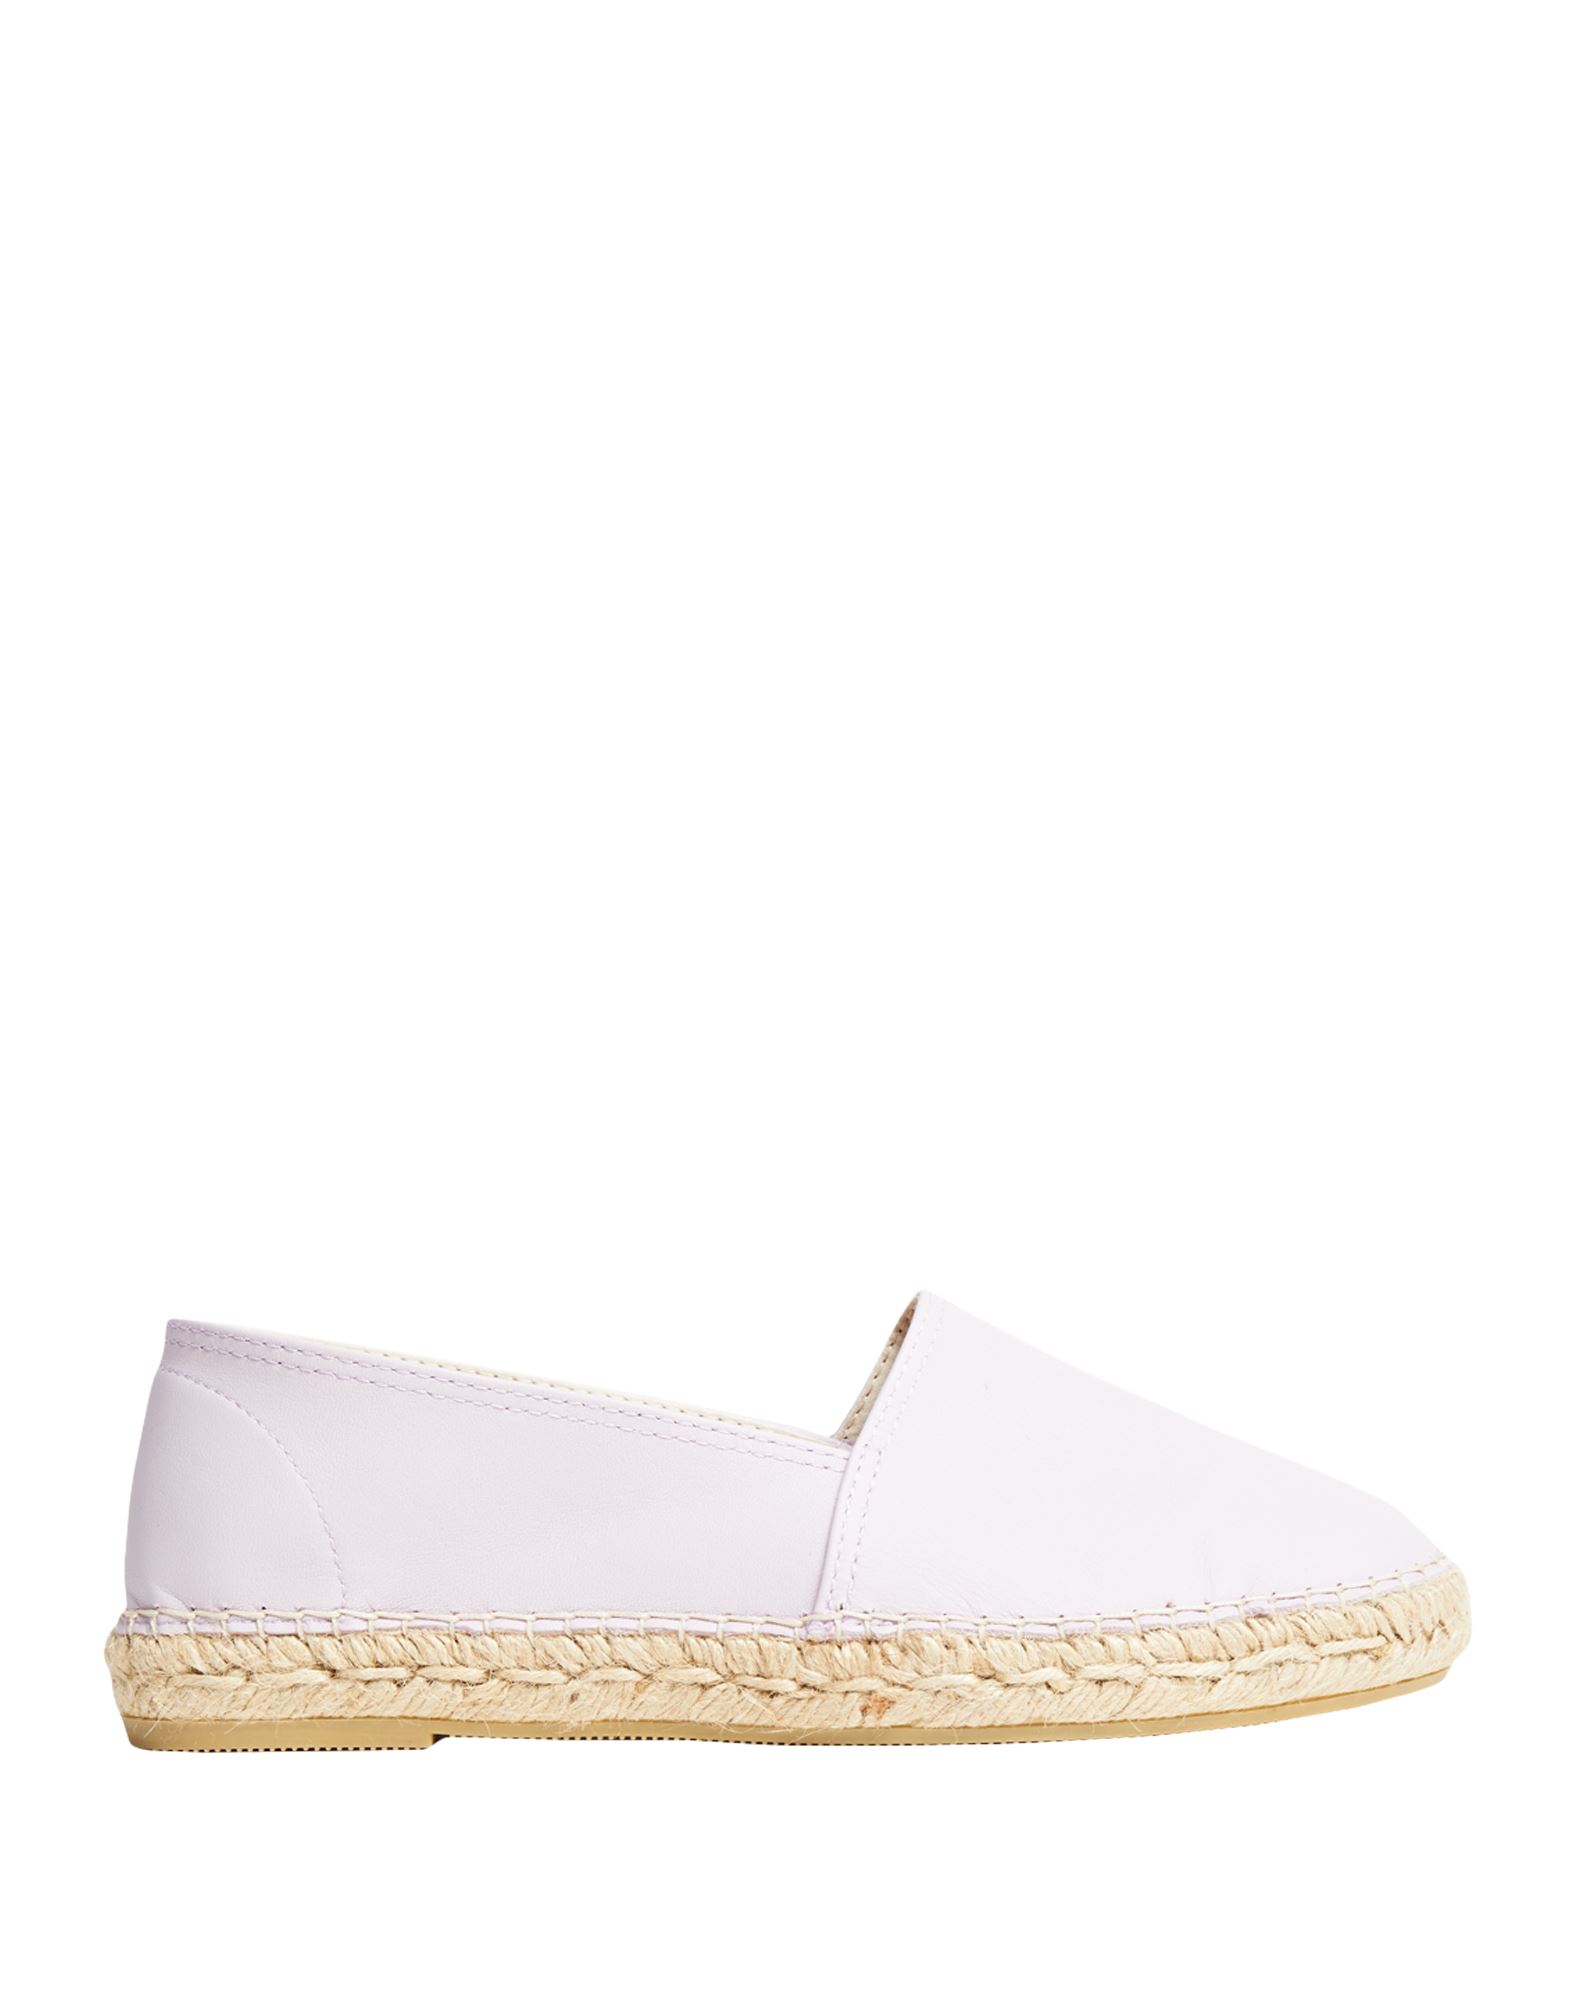 8 BY YOOX 8 BY YOOX LEATHER ROUND TOE ESPADRILLES WOMAN ESPADRILLES LILAC SIZE 11 OVINE LEATHER